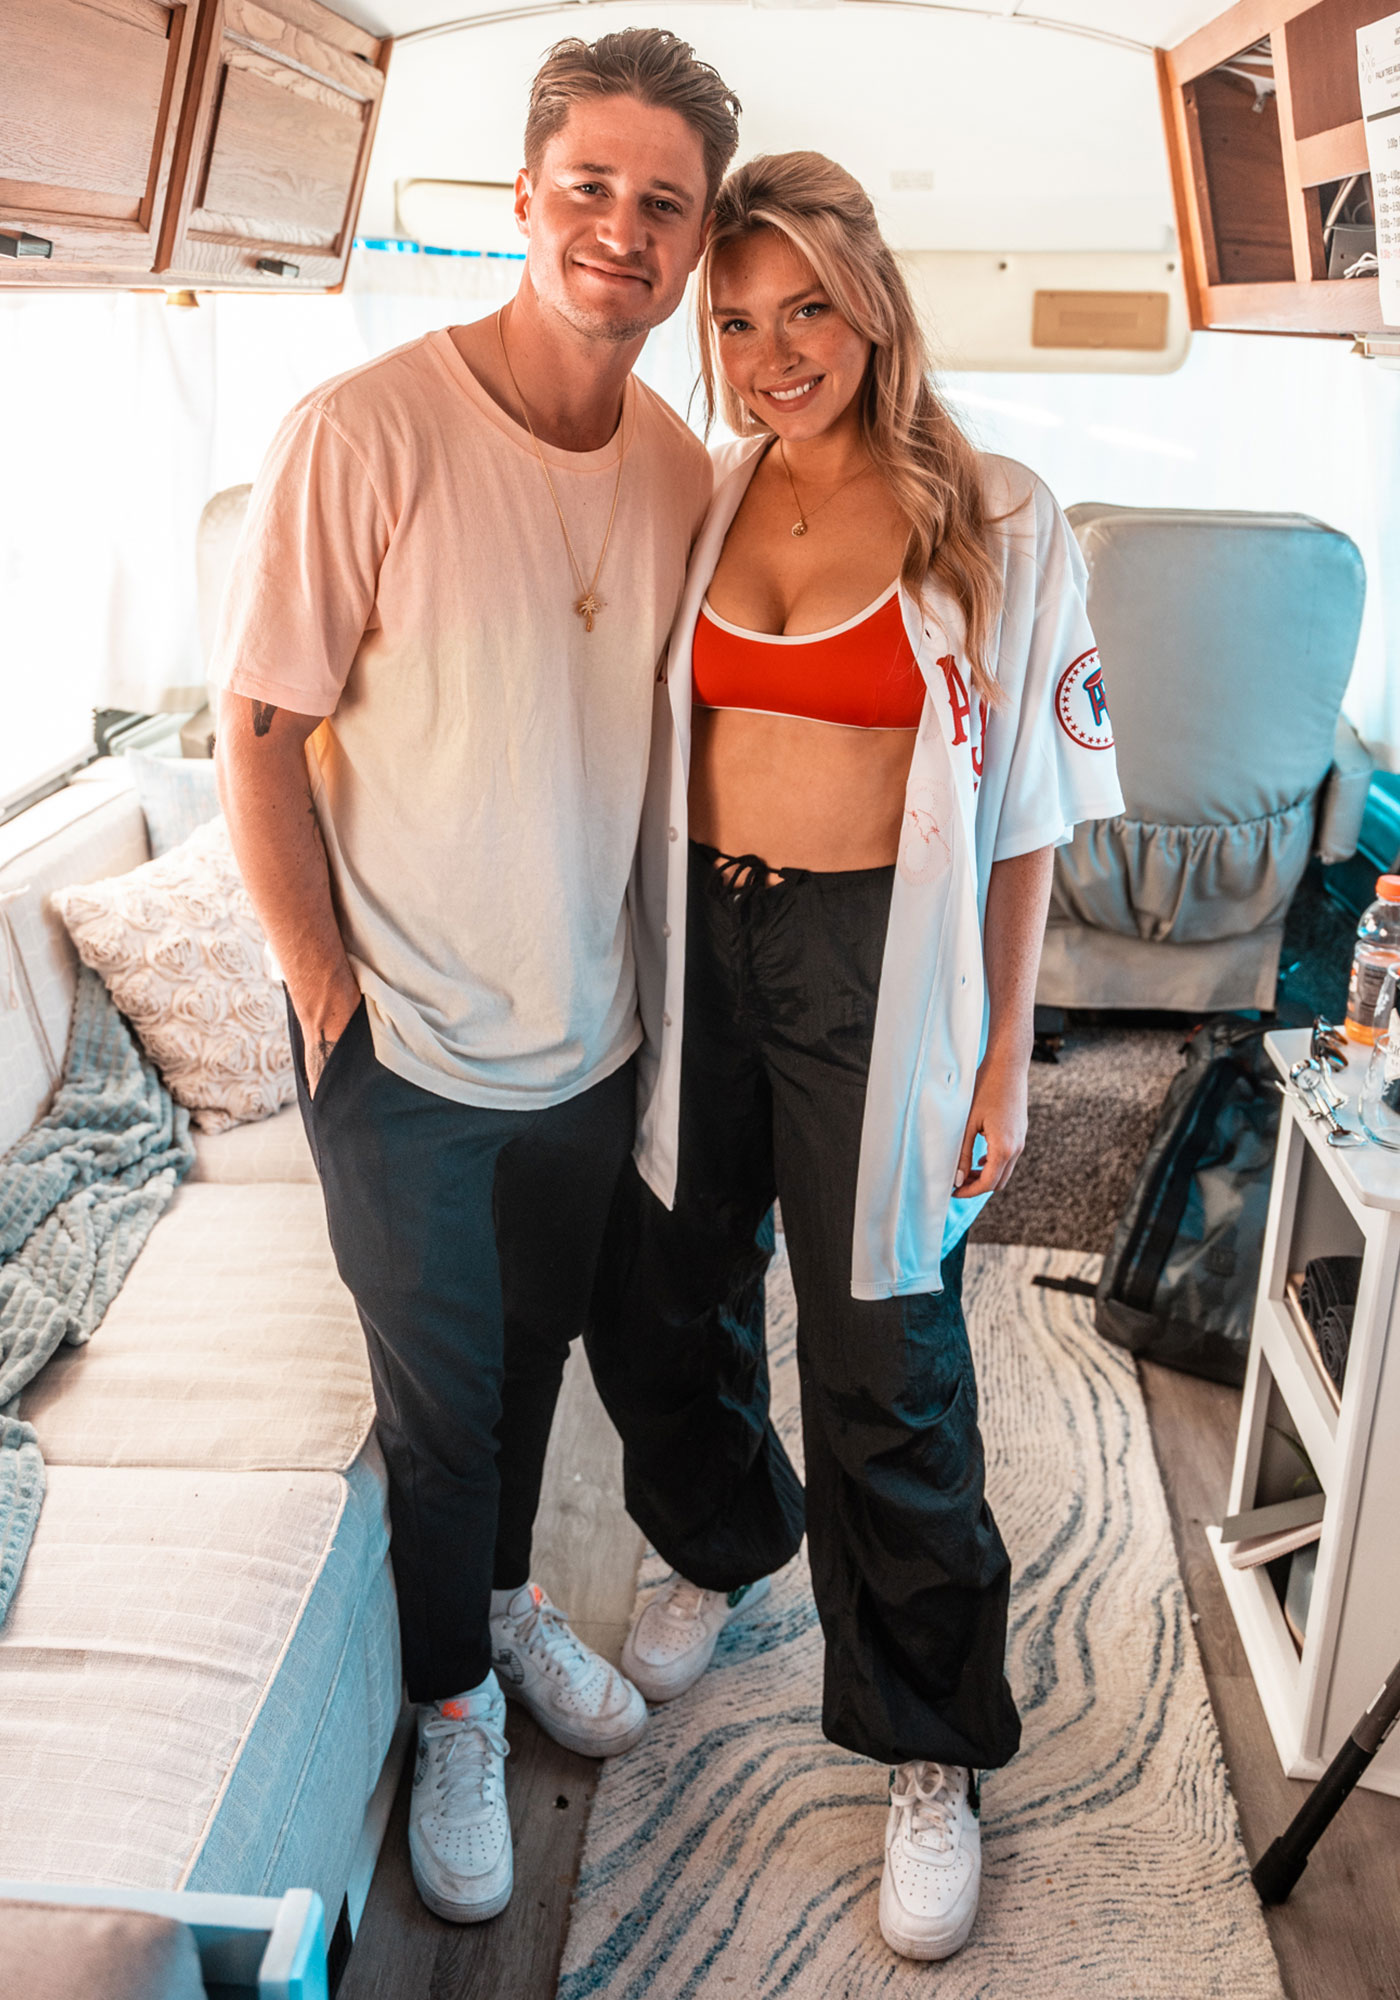 Kygo posed with Camille Kostek before taking over the DJ booth at the Palm Tree Music Festival 2022